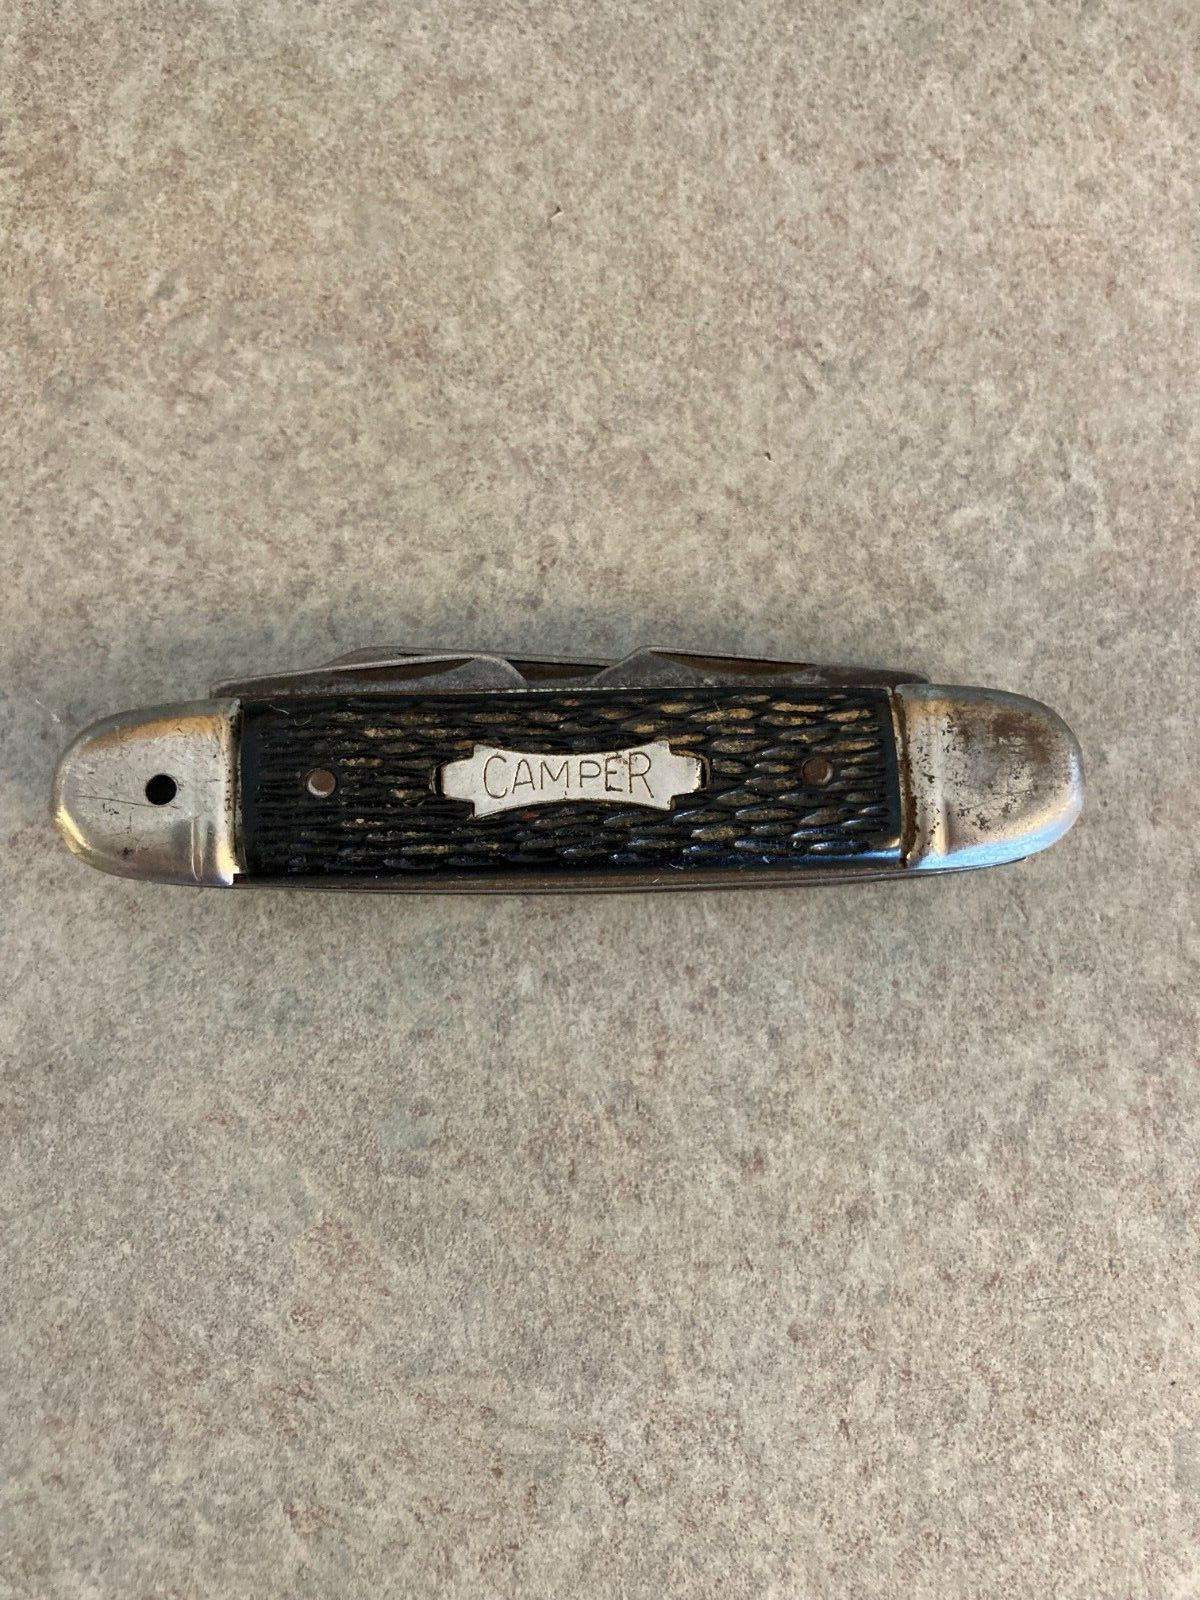 Vintage CAMPER Scout Pocket Knife  1950-1986 by The Ideal Knife Co. in Prov. RI